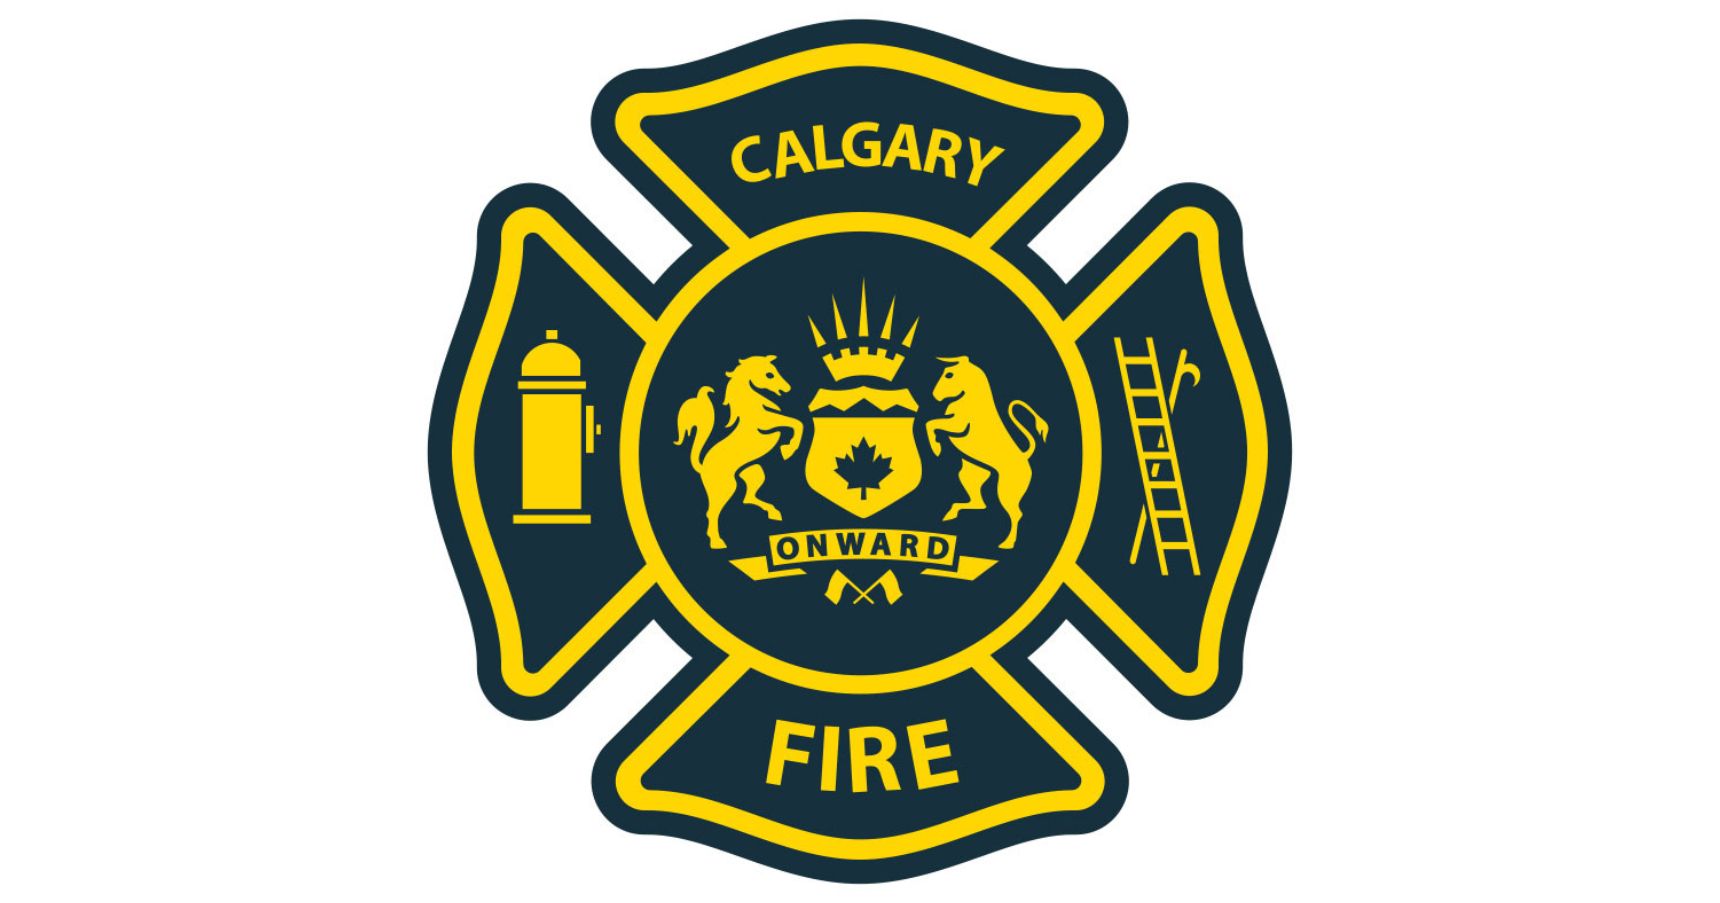 Pierce Dealer Commercial Emergency Equipment Co. Secures10-Year Contract with Calgary Fire Department